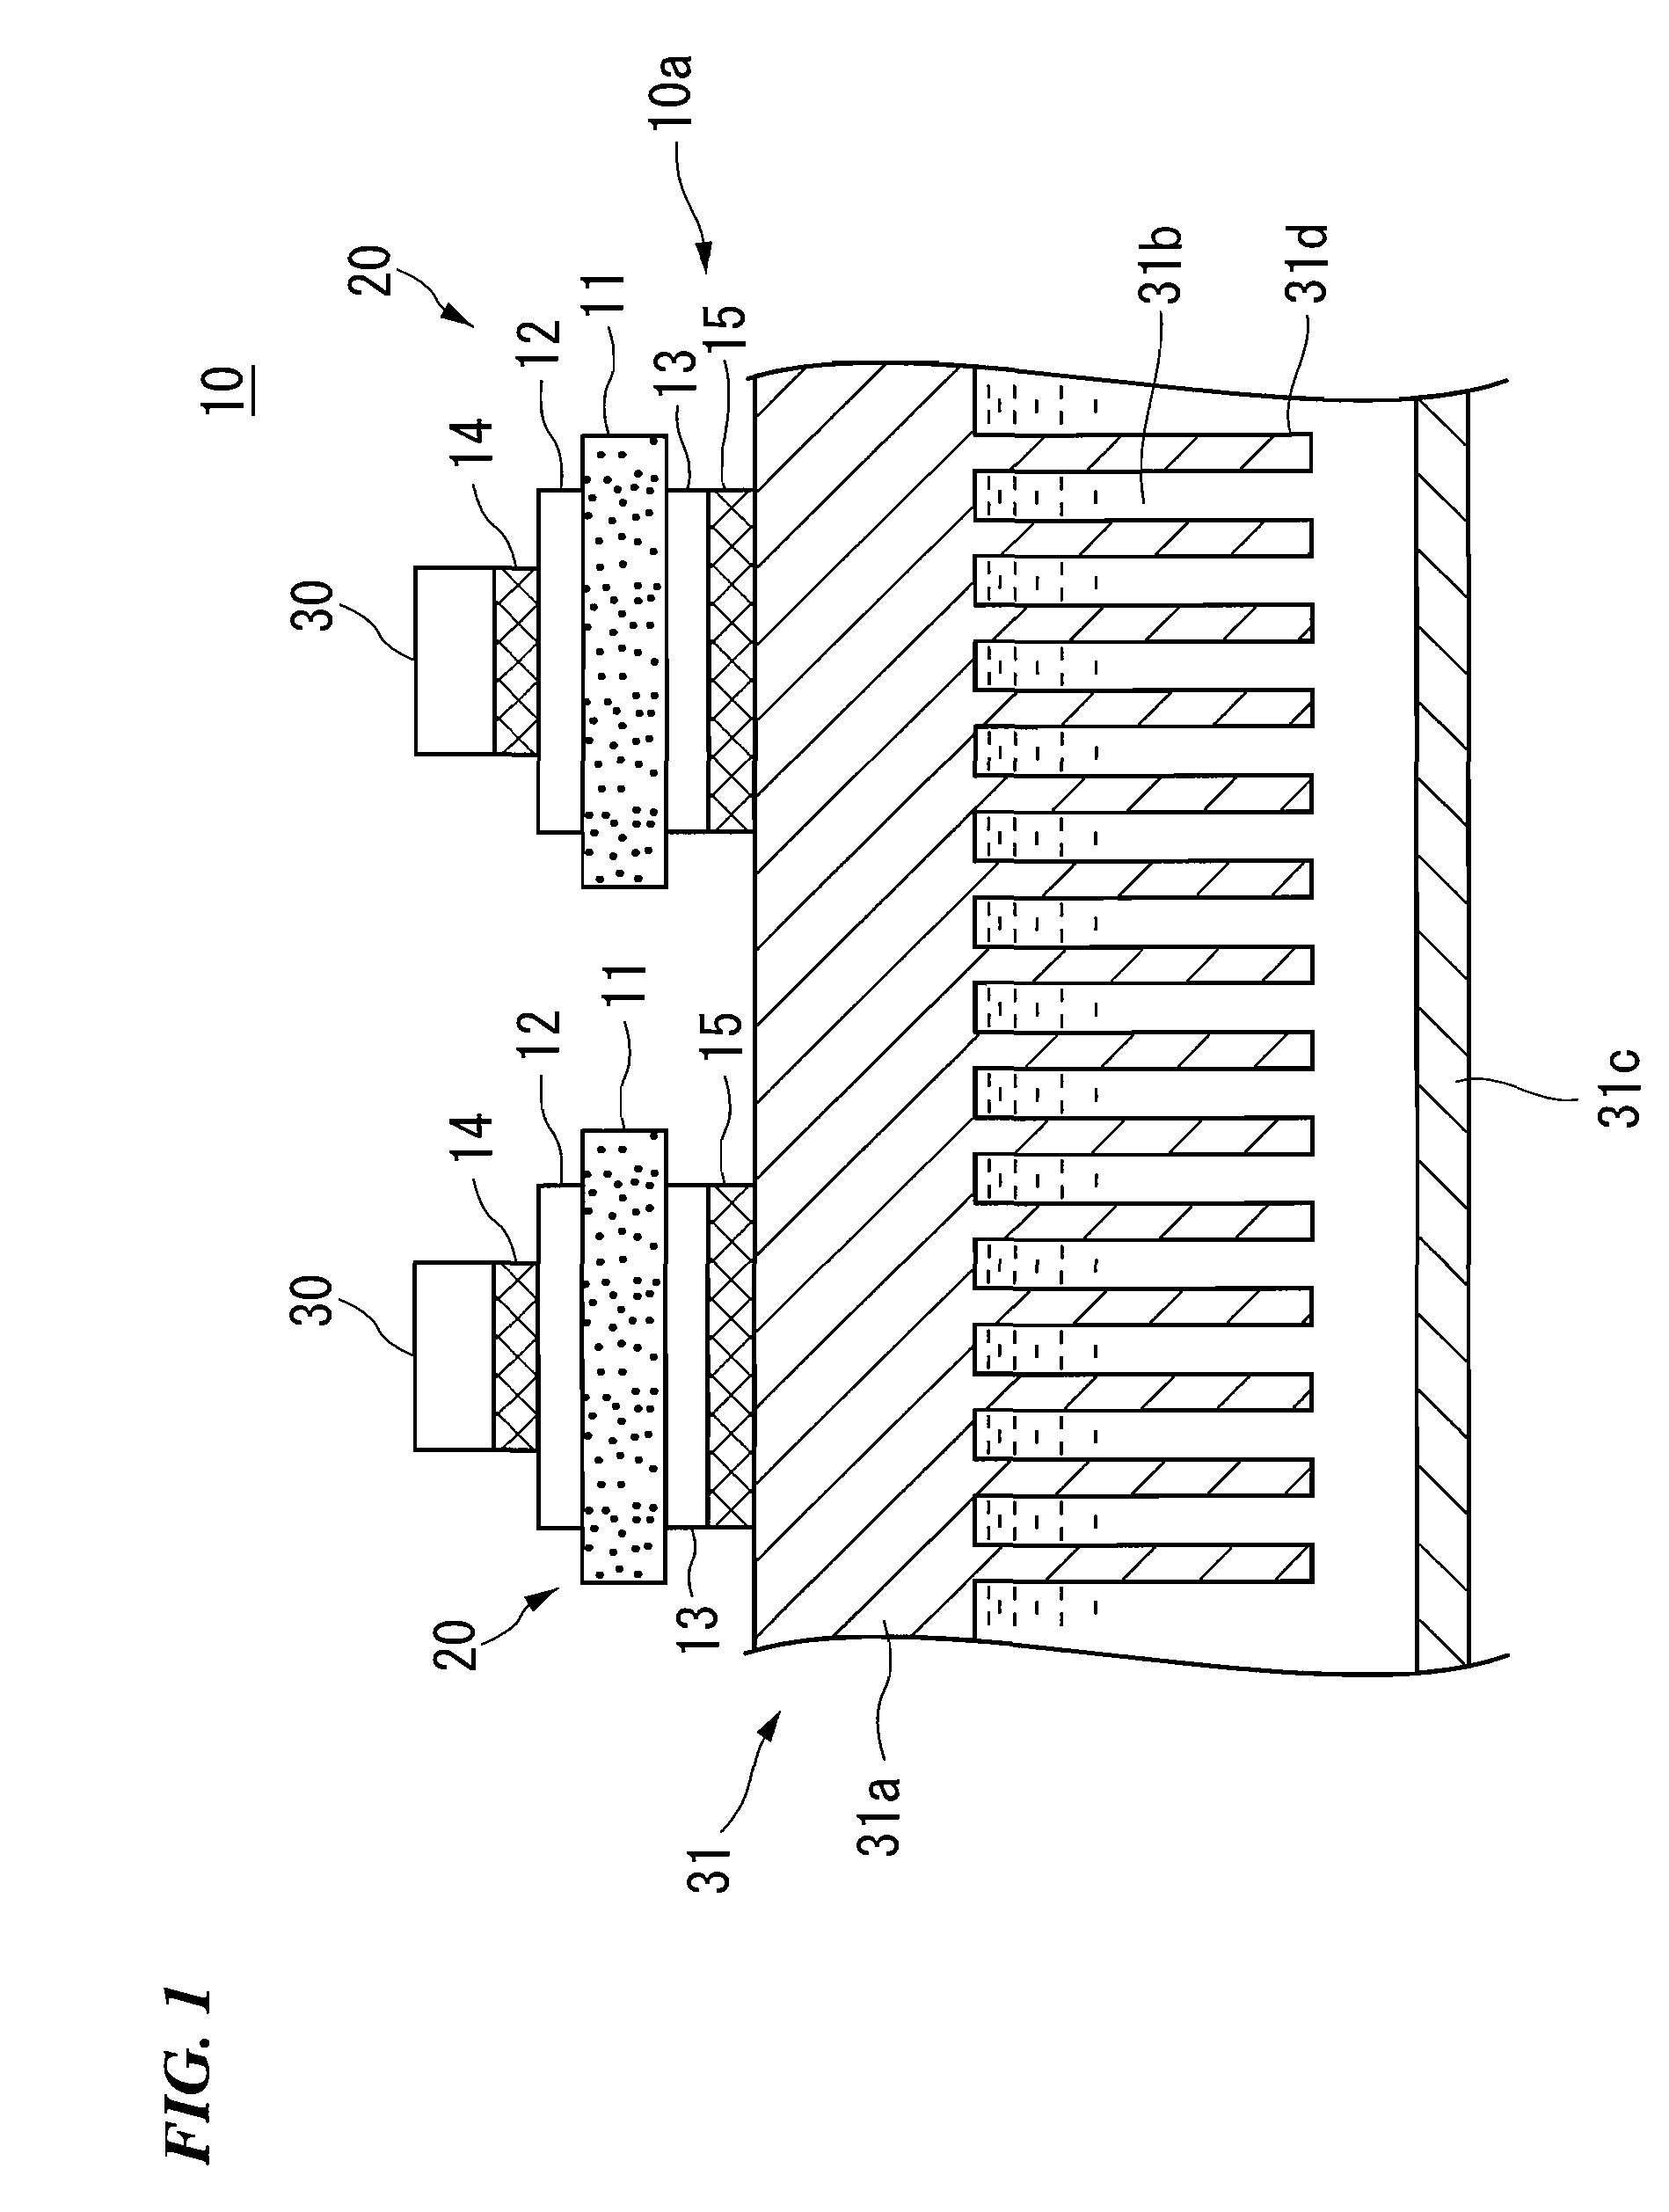 Insulating circuit board and insulating circuit board having cooling sink